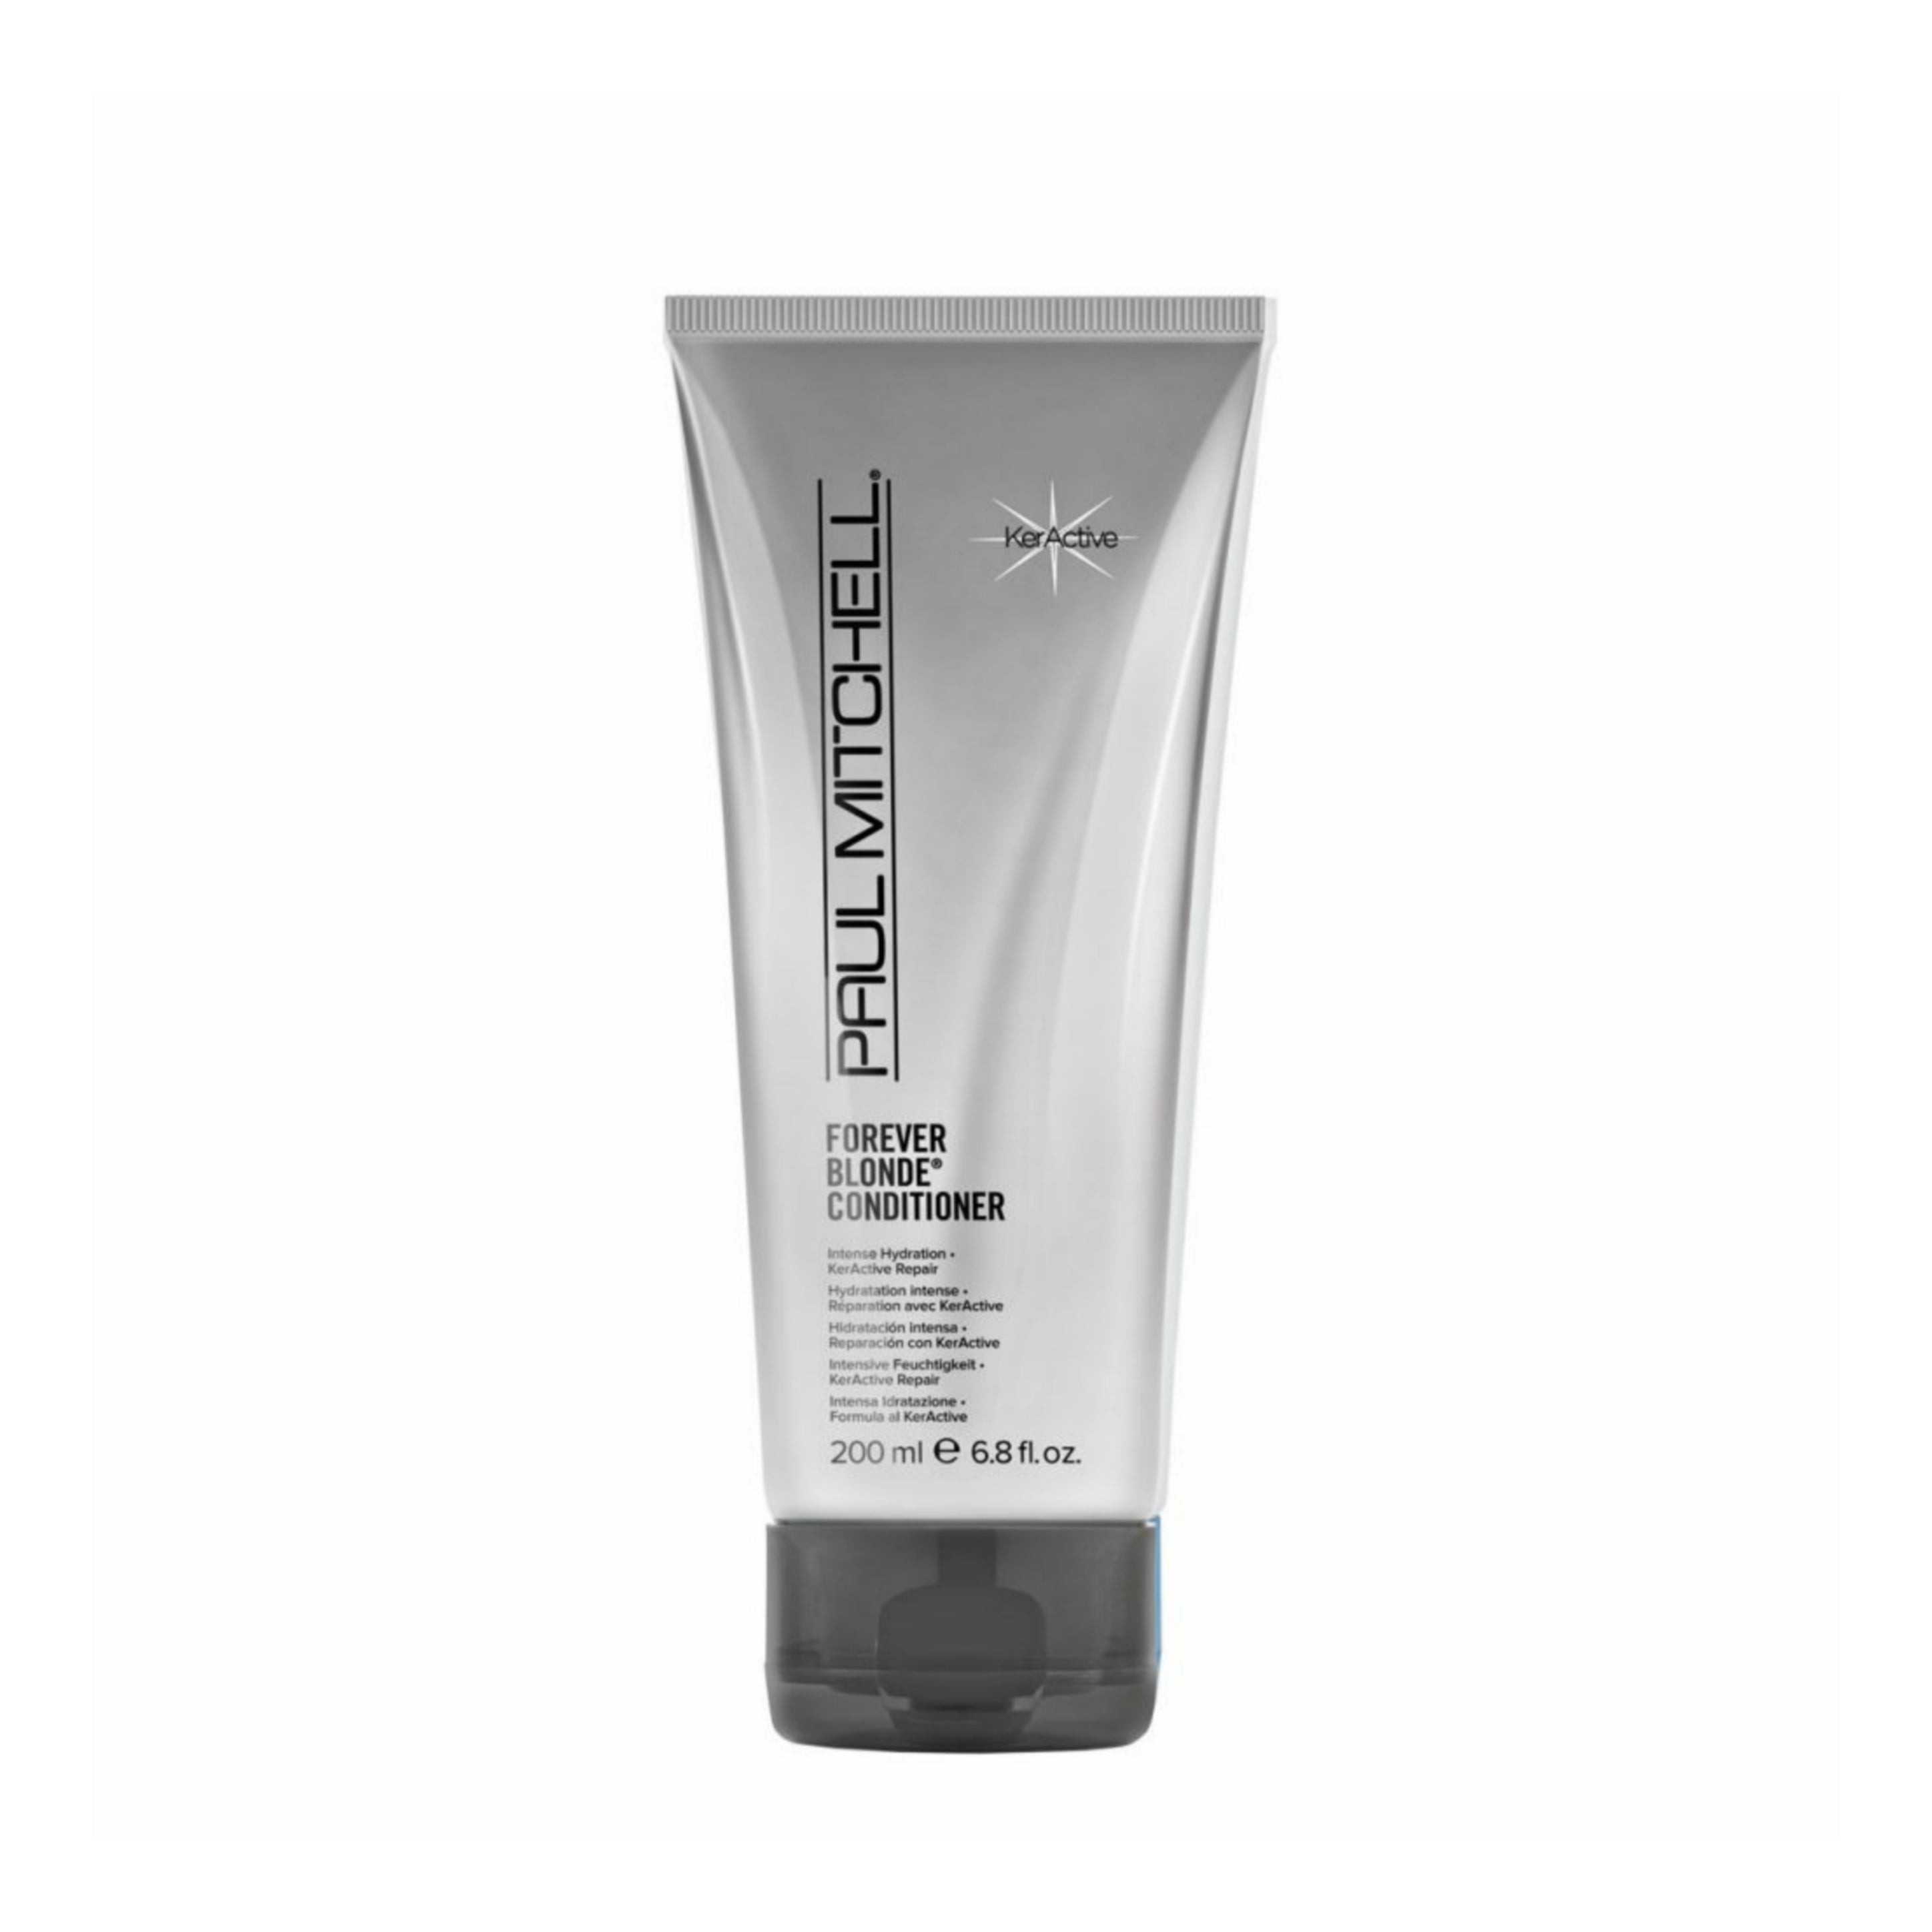 Paul Mitchell Forever Blonde Hair Care